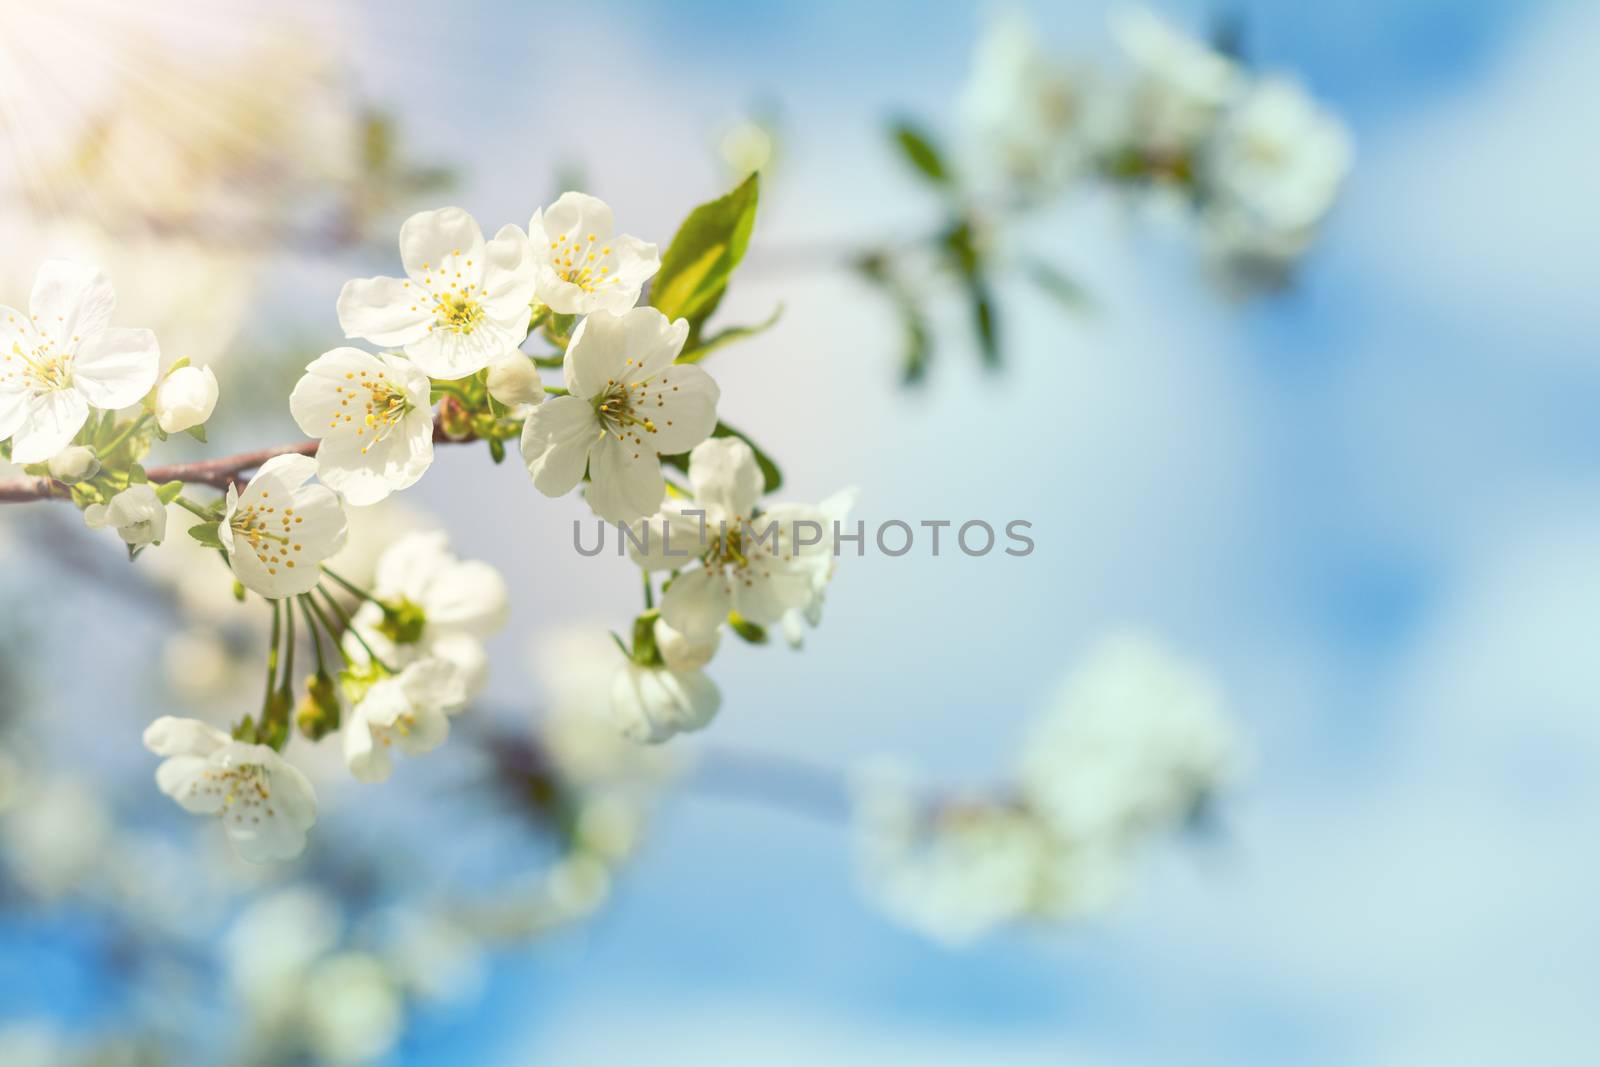 Spring background art with white cherry blossom. Beautiful nature scene with blooming tree and sun flare. Sunny day. Spring flowers. Beautiful orchard. Abstract blurred background. Shallow depth of field.